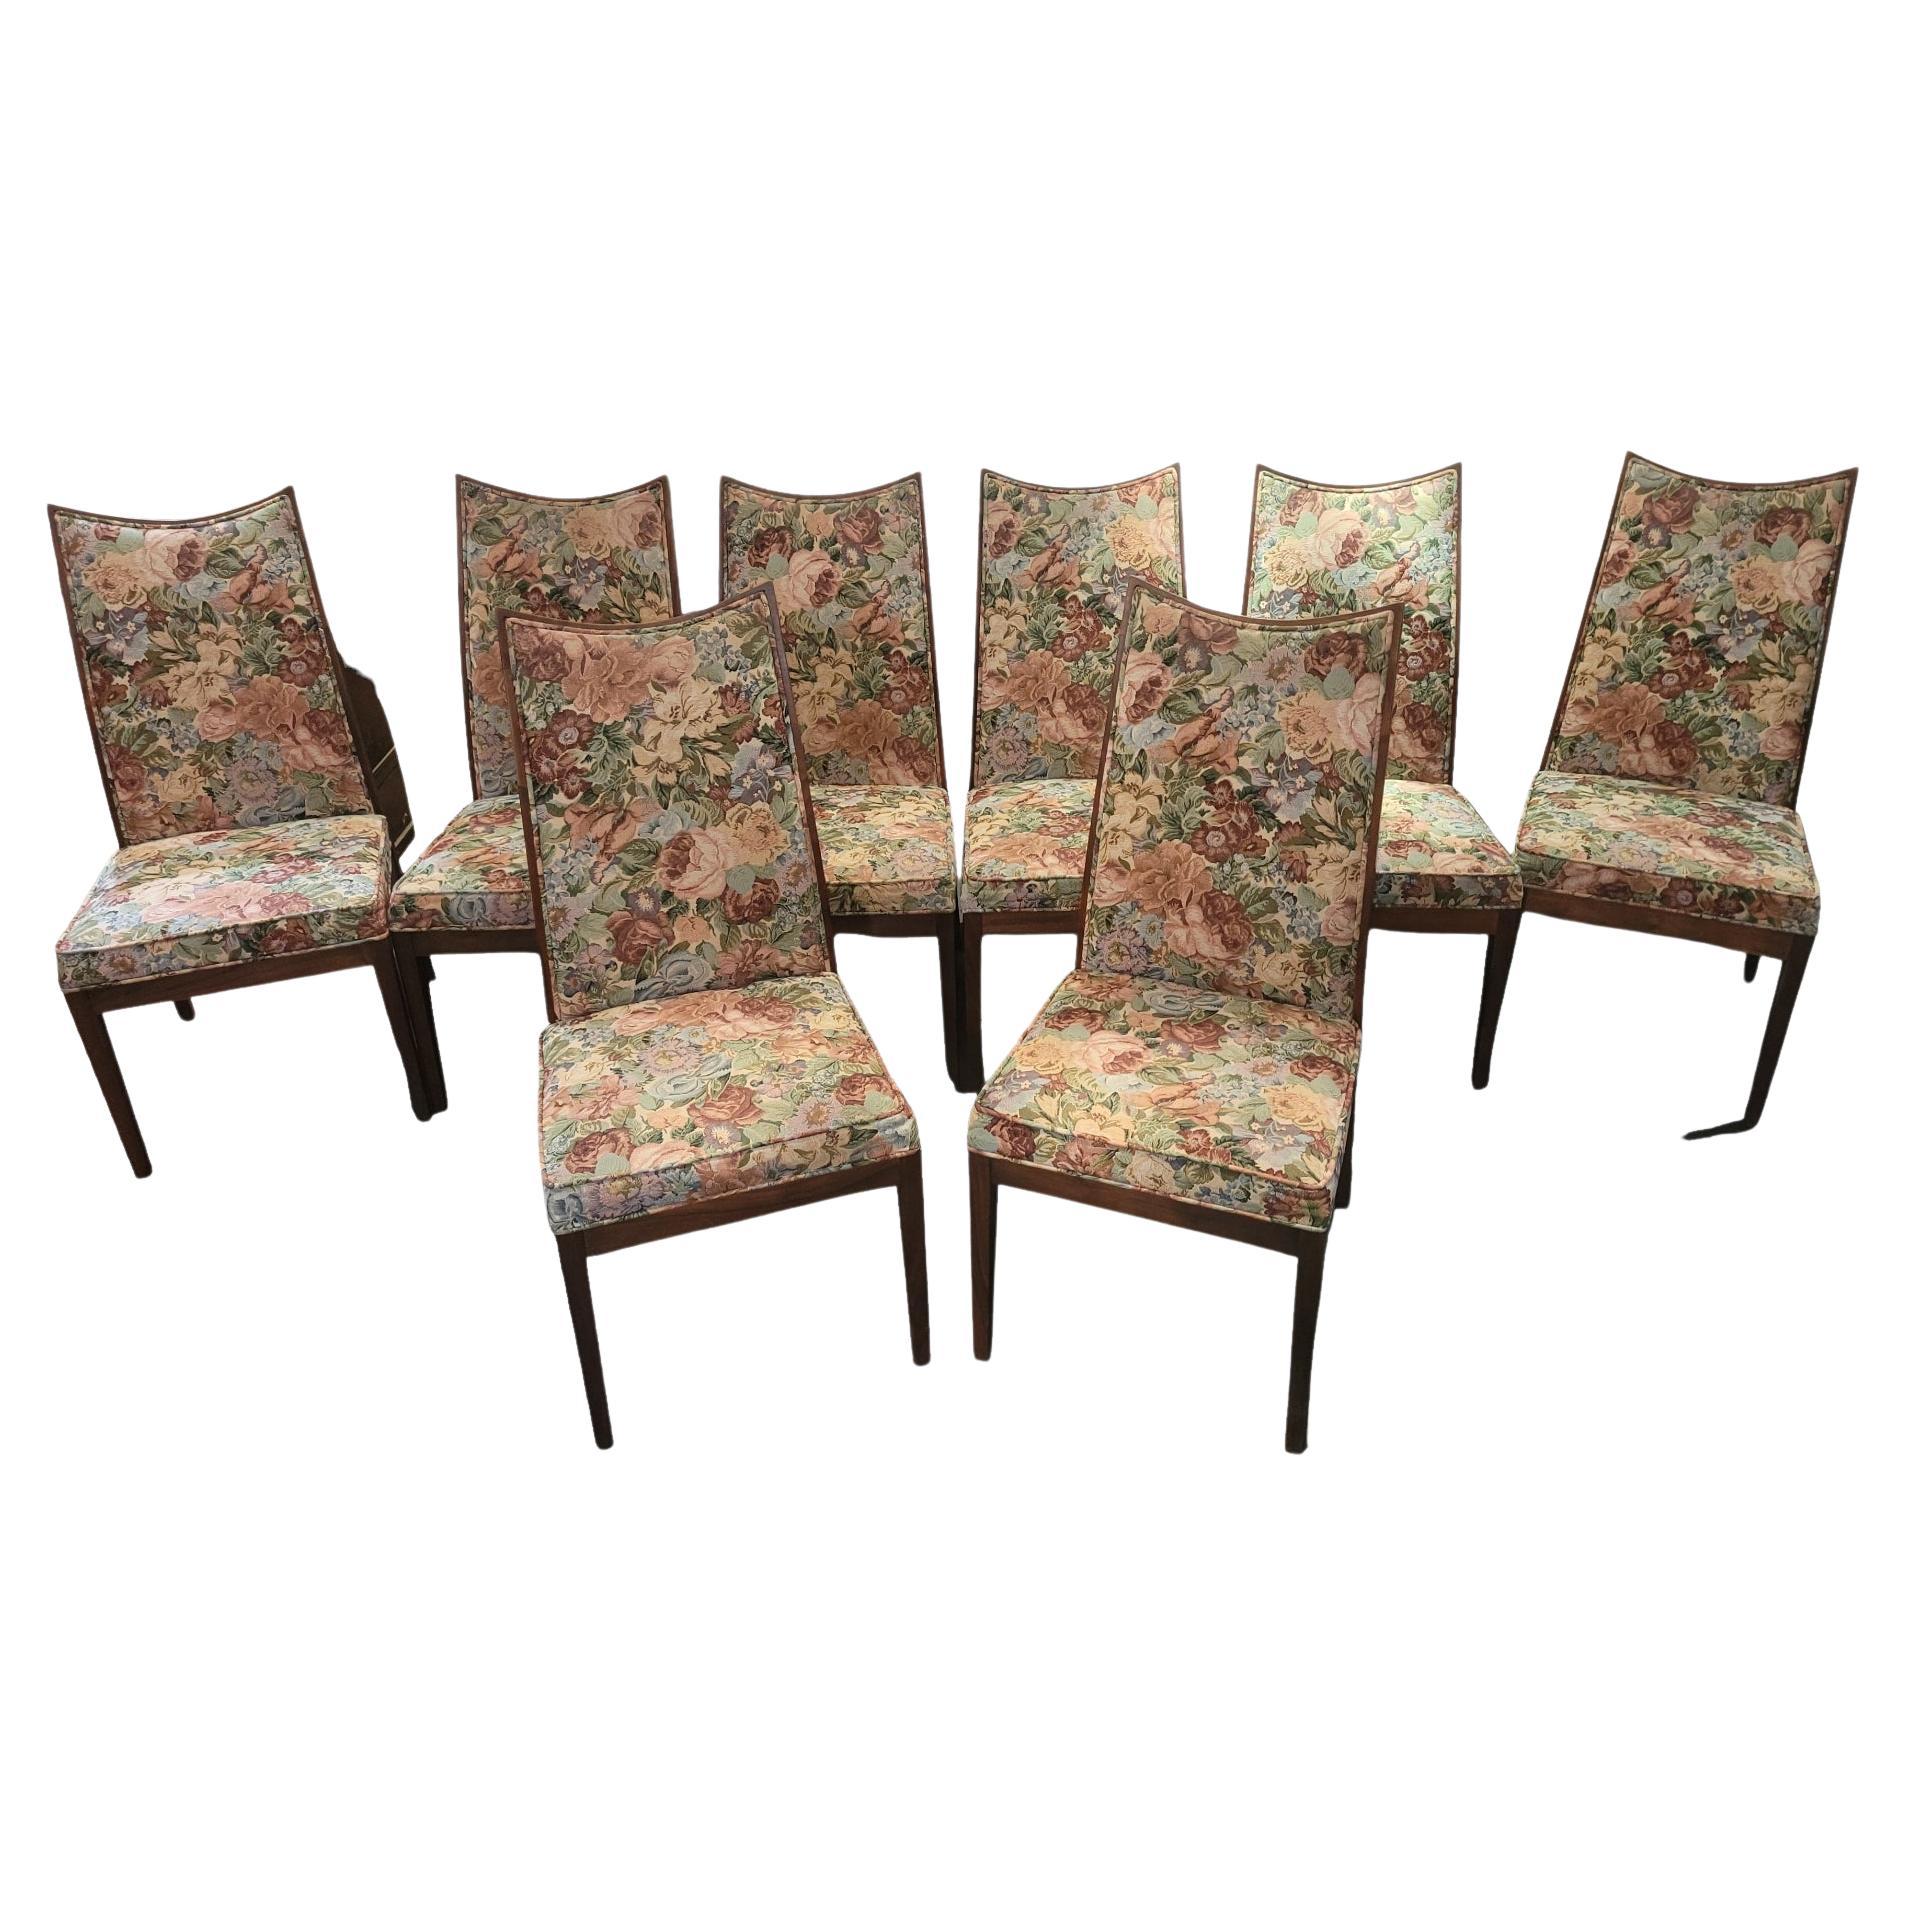 Set of Eight Wood And Floral Chairs